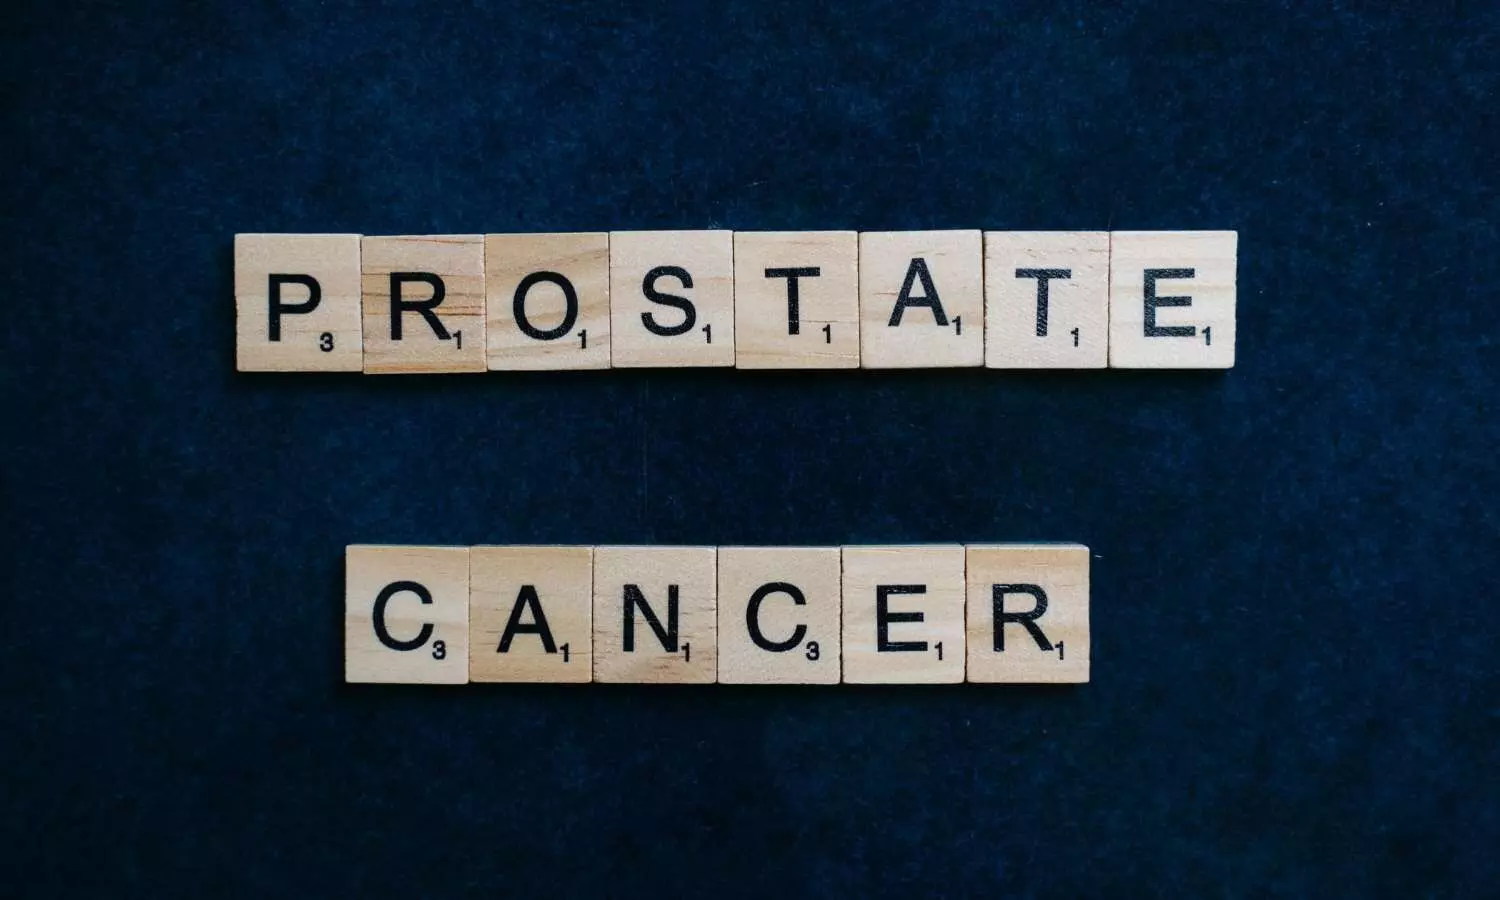 Shortened course of radiation therapy safe and effective for men with high-risk prostate cancer